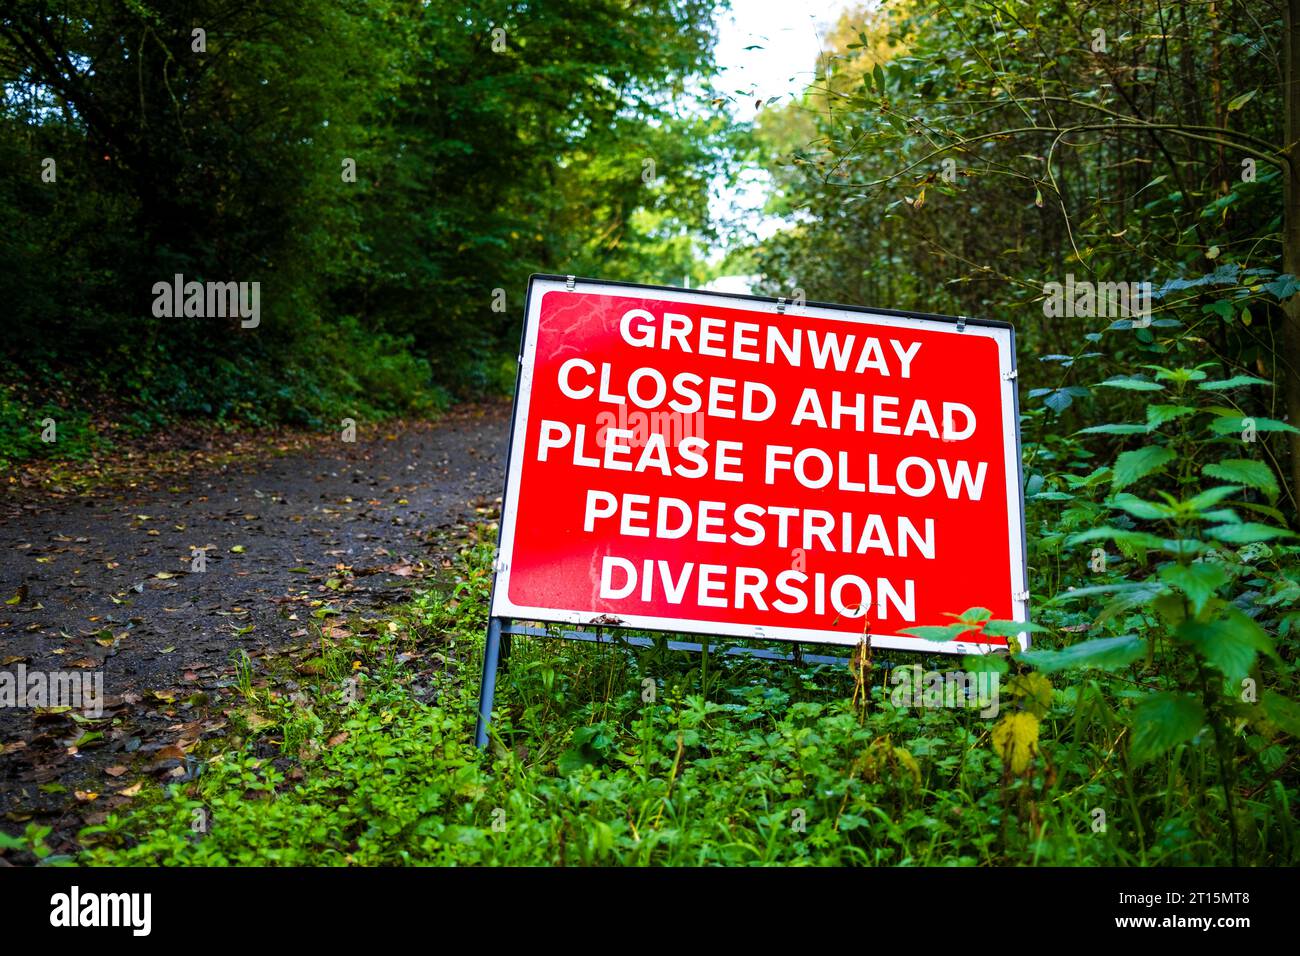 warning sign that the footpath is closed ahead pedestrians to follow a diversion, Salford greenway Roe Green Worsley Stock Photo